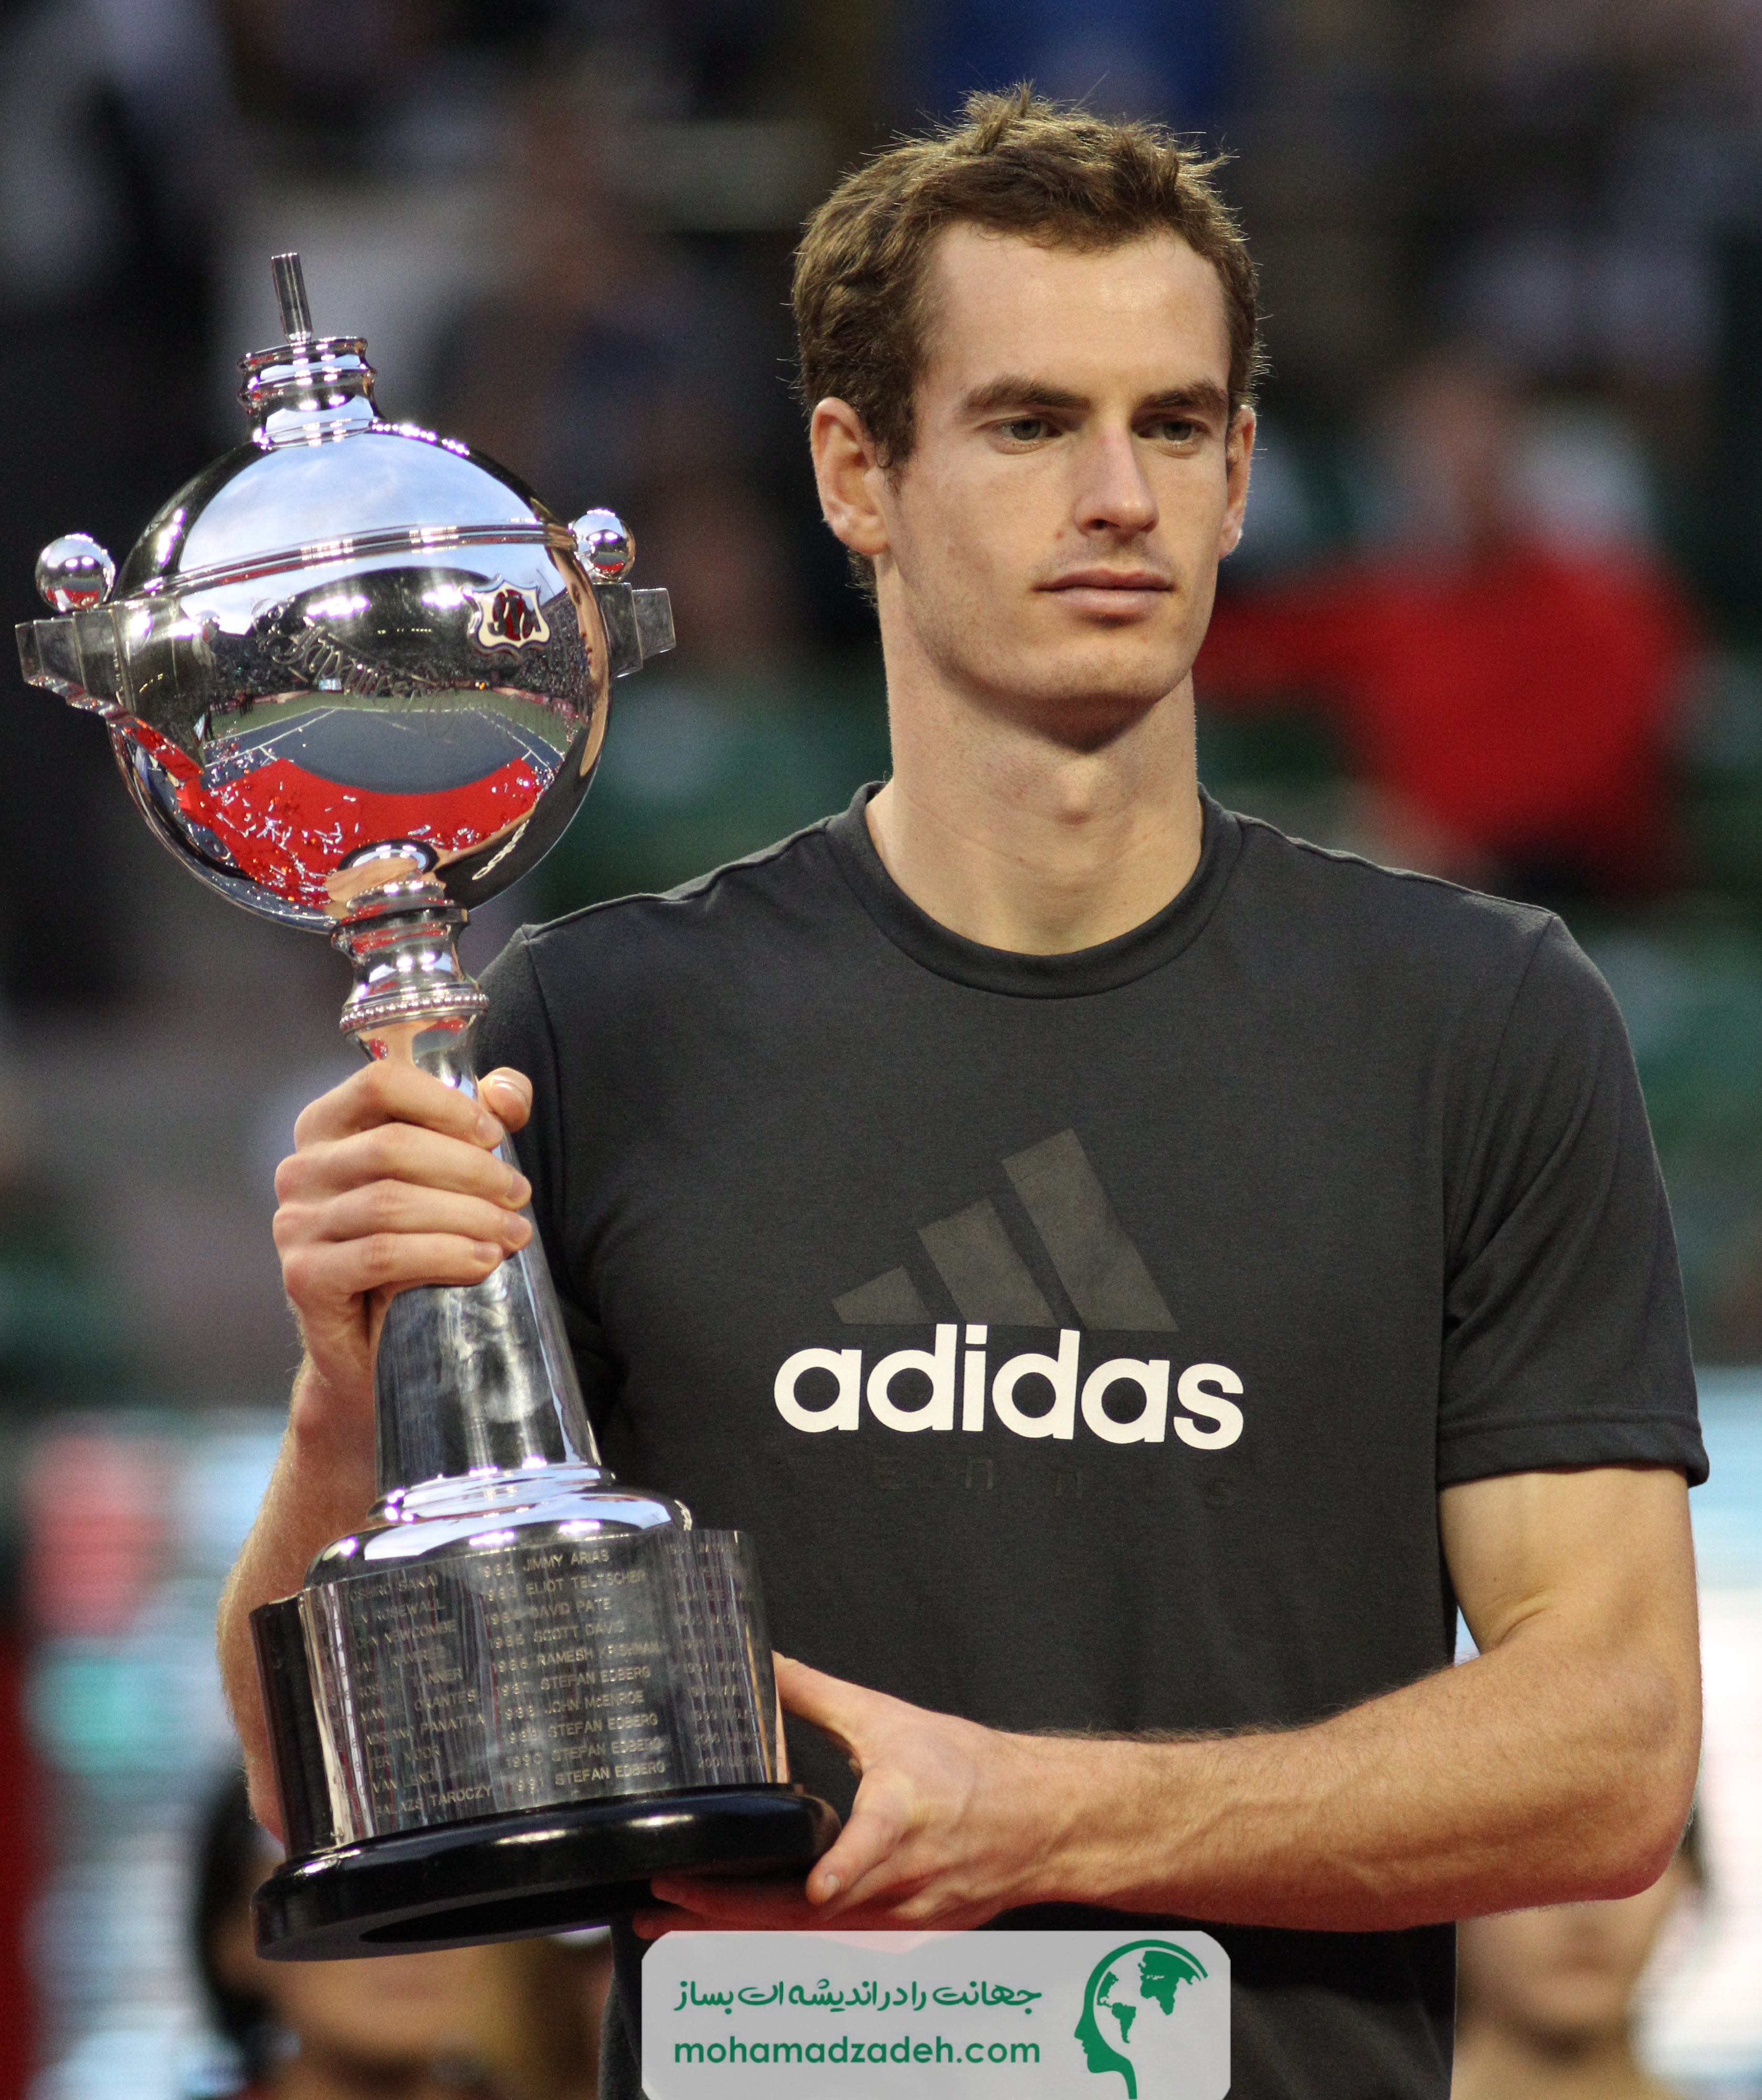 andy_murray_tokyo_2011_954x.png